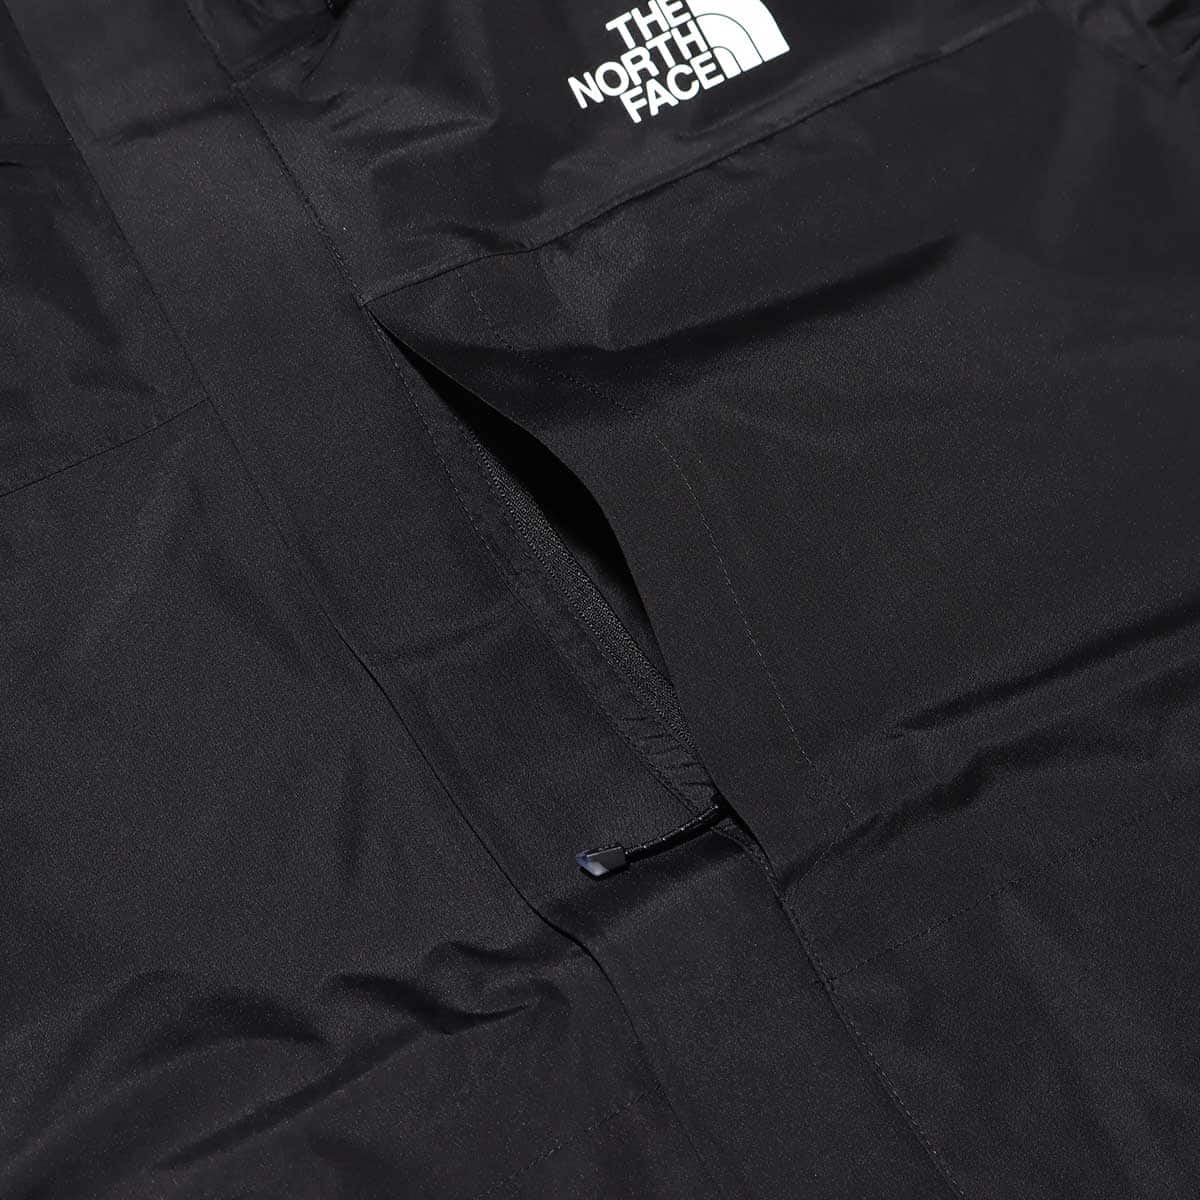 THE NORTH FACE CLOUD JACKET BLACK